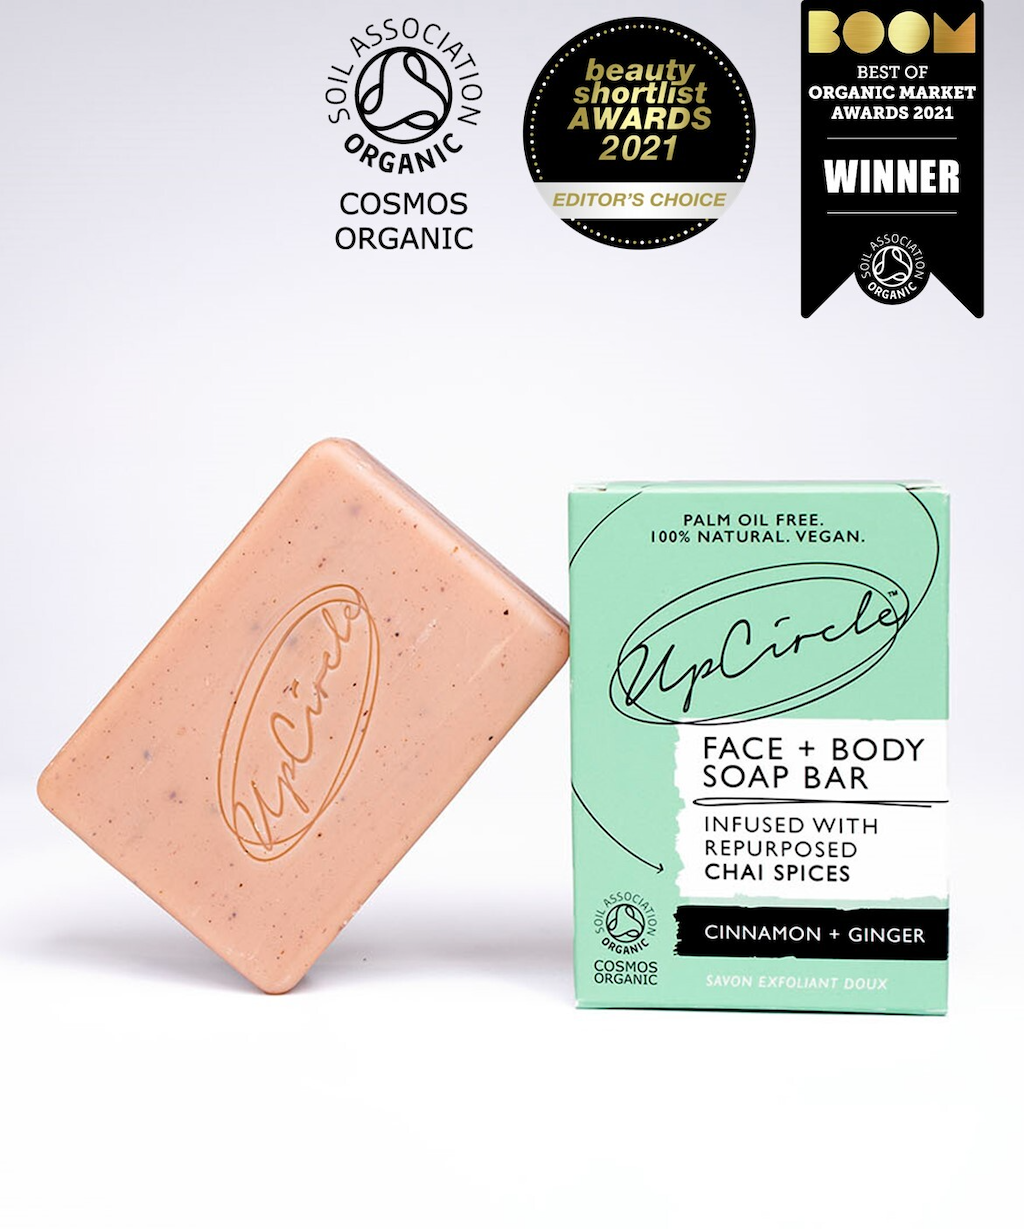 UpCircle Cleansing Soap Bar with Cinnamon and Ginger. Certified organic soap. The pink soap bar is leaning against its green branded box. A number of awards and certifications are overlaid on the image.